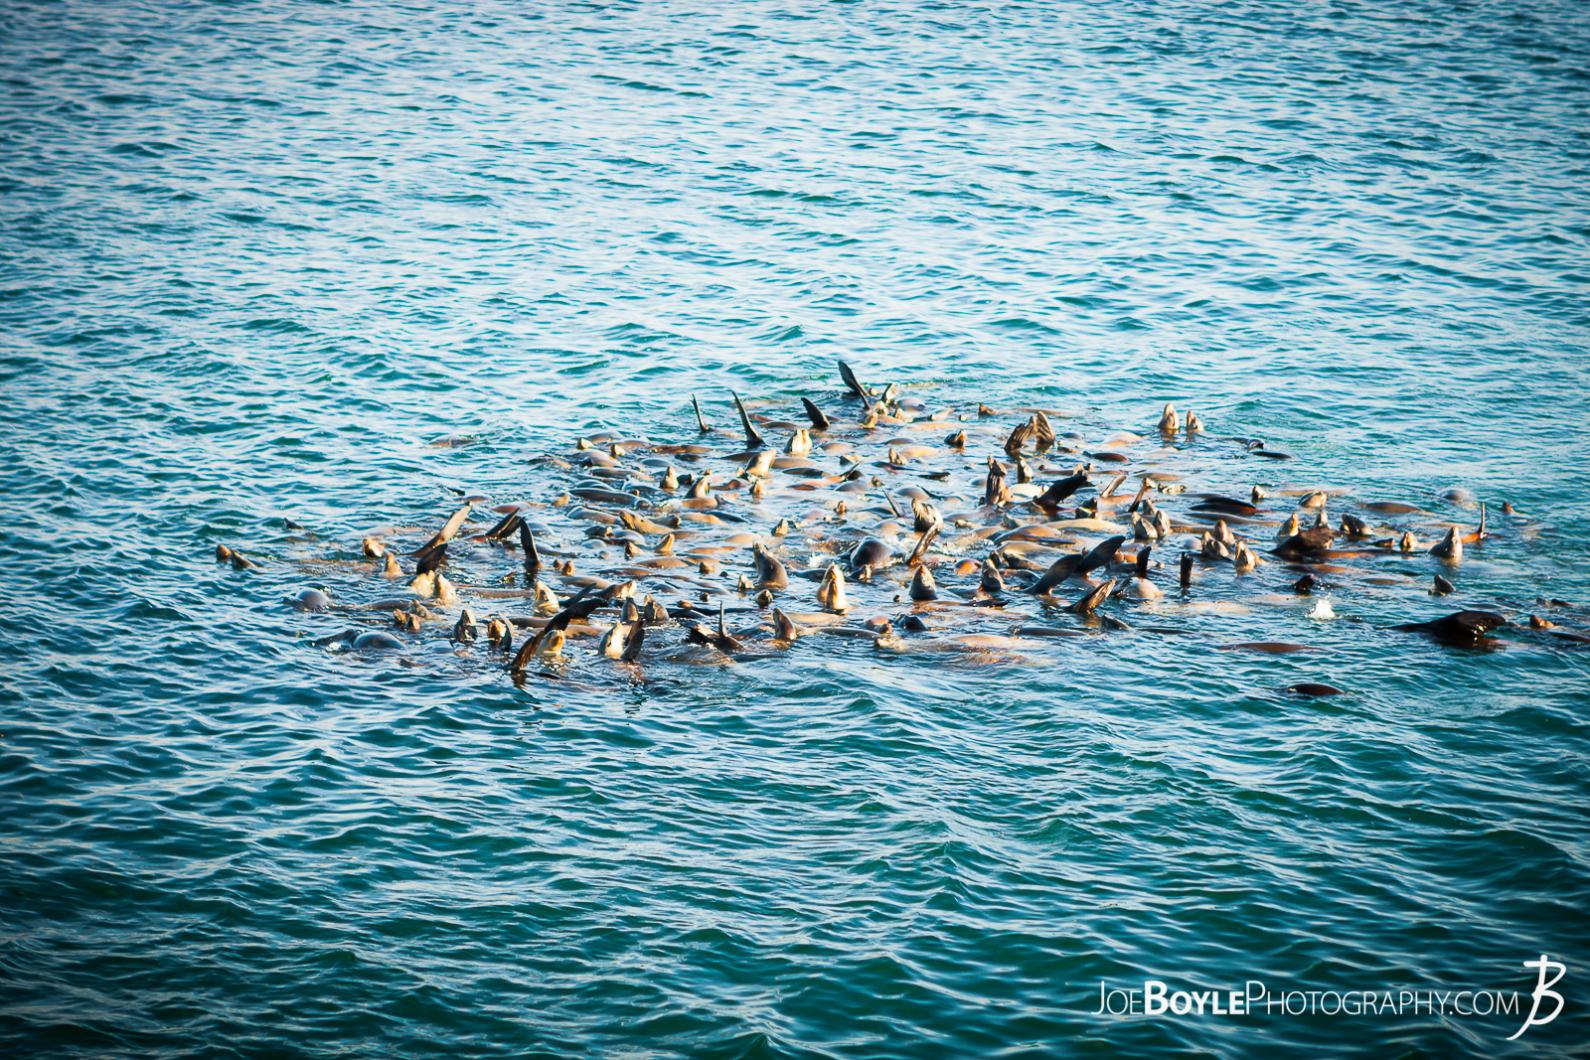 I was on a trip visiting a good friend of mine in Monterey and off of one of the many piers in Monterey we witnessed this school, properly known as a harem, of Sea Lions!